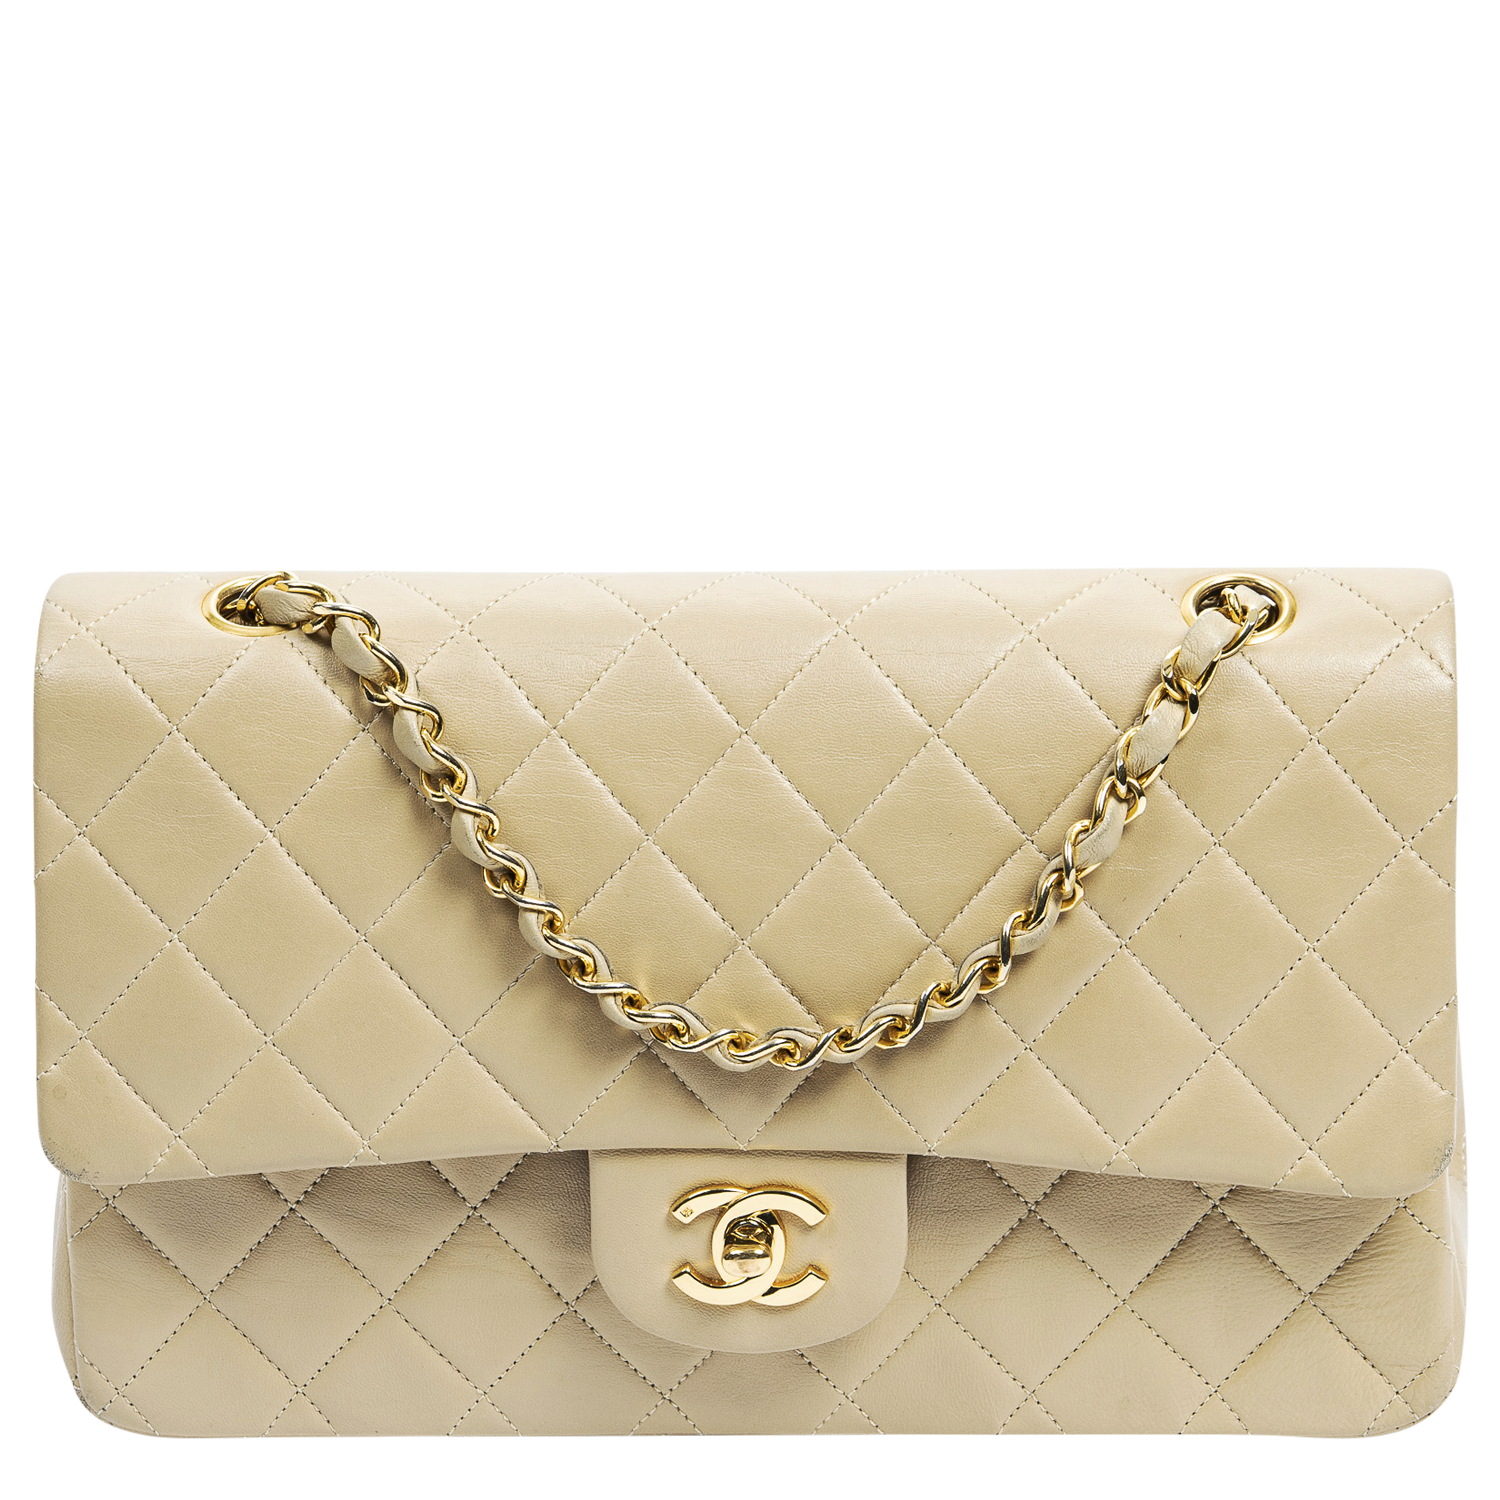 lambskin leather chanel bag authentic